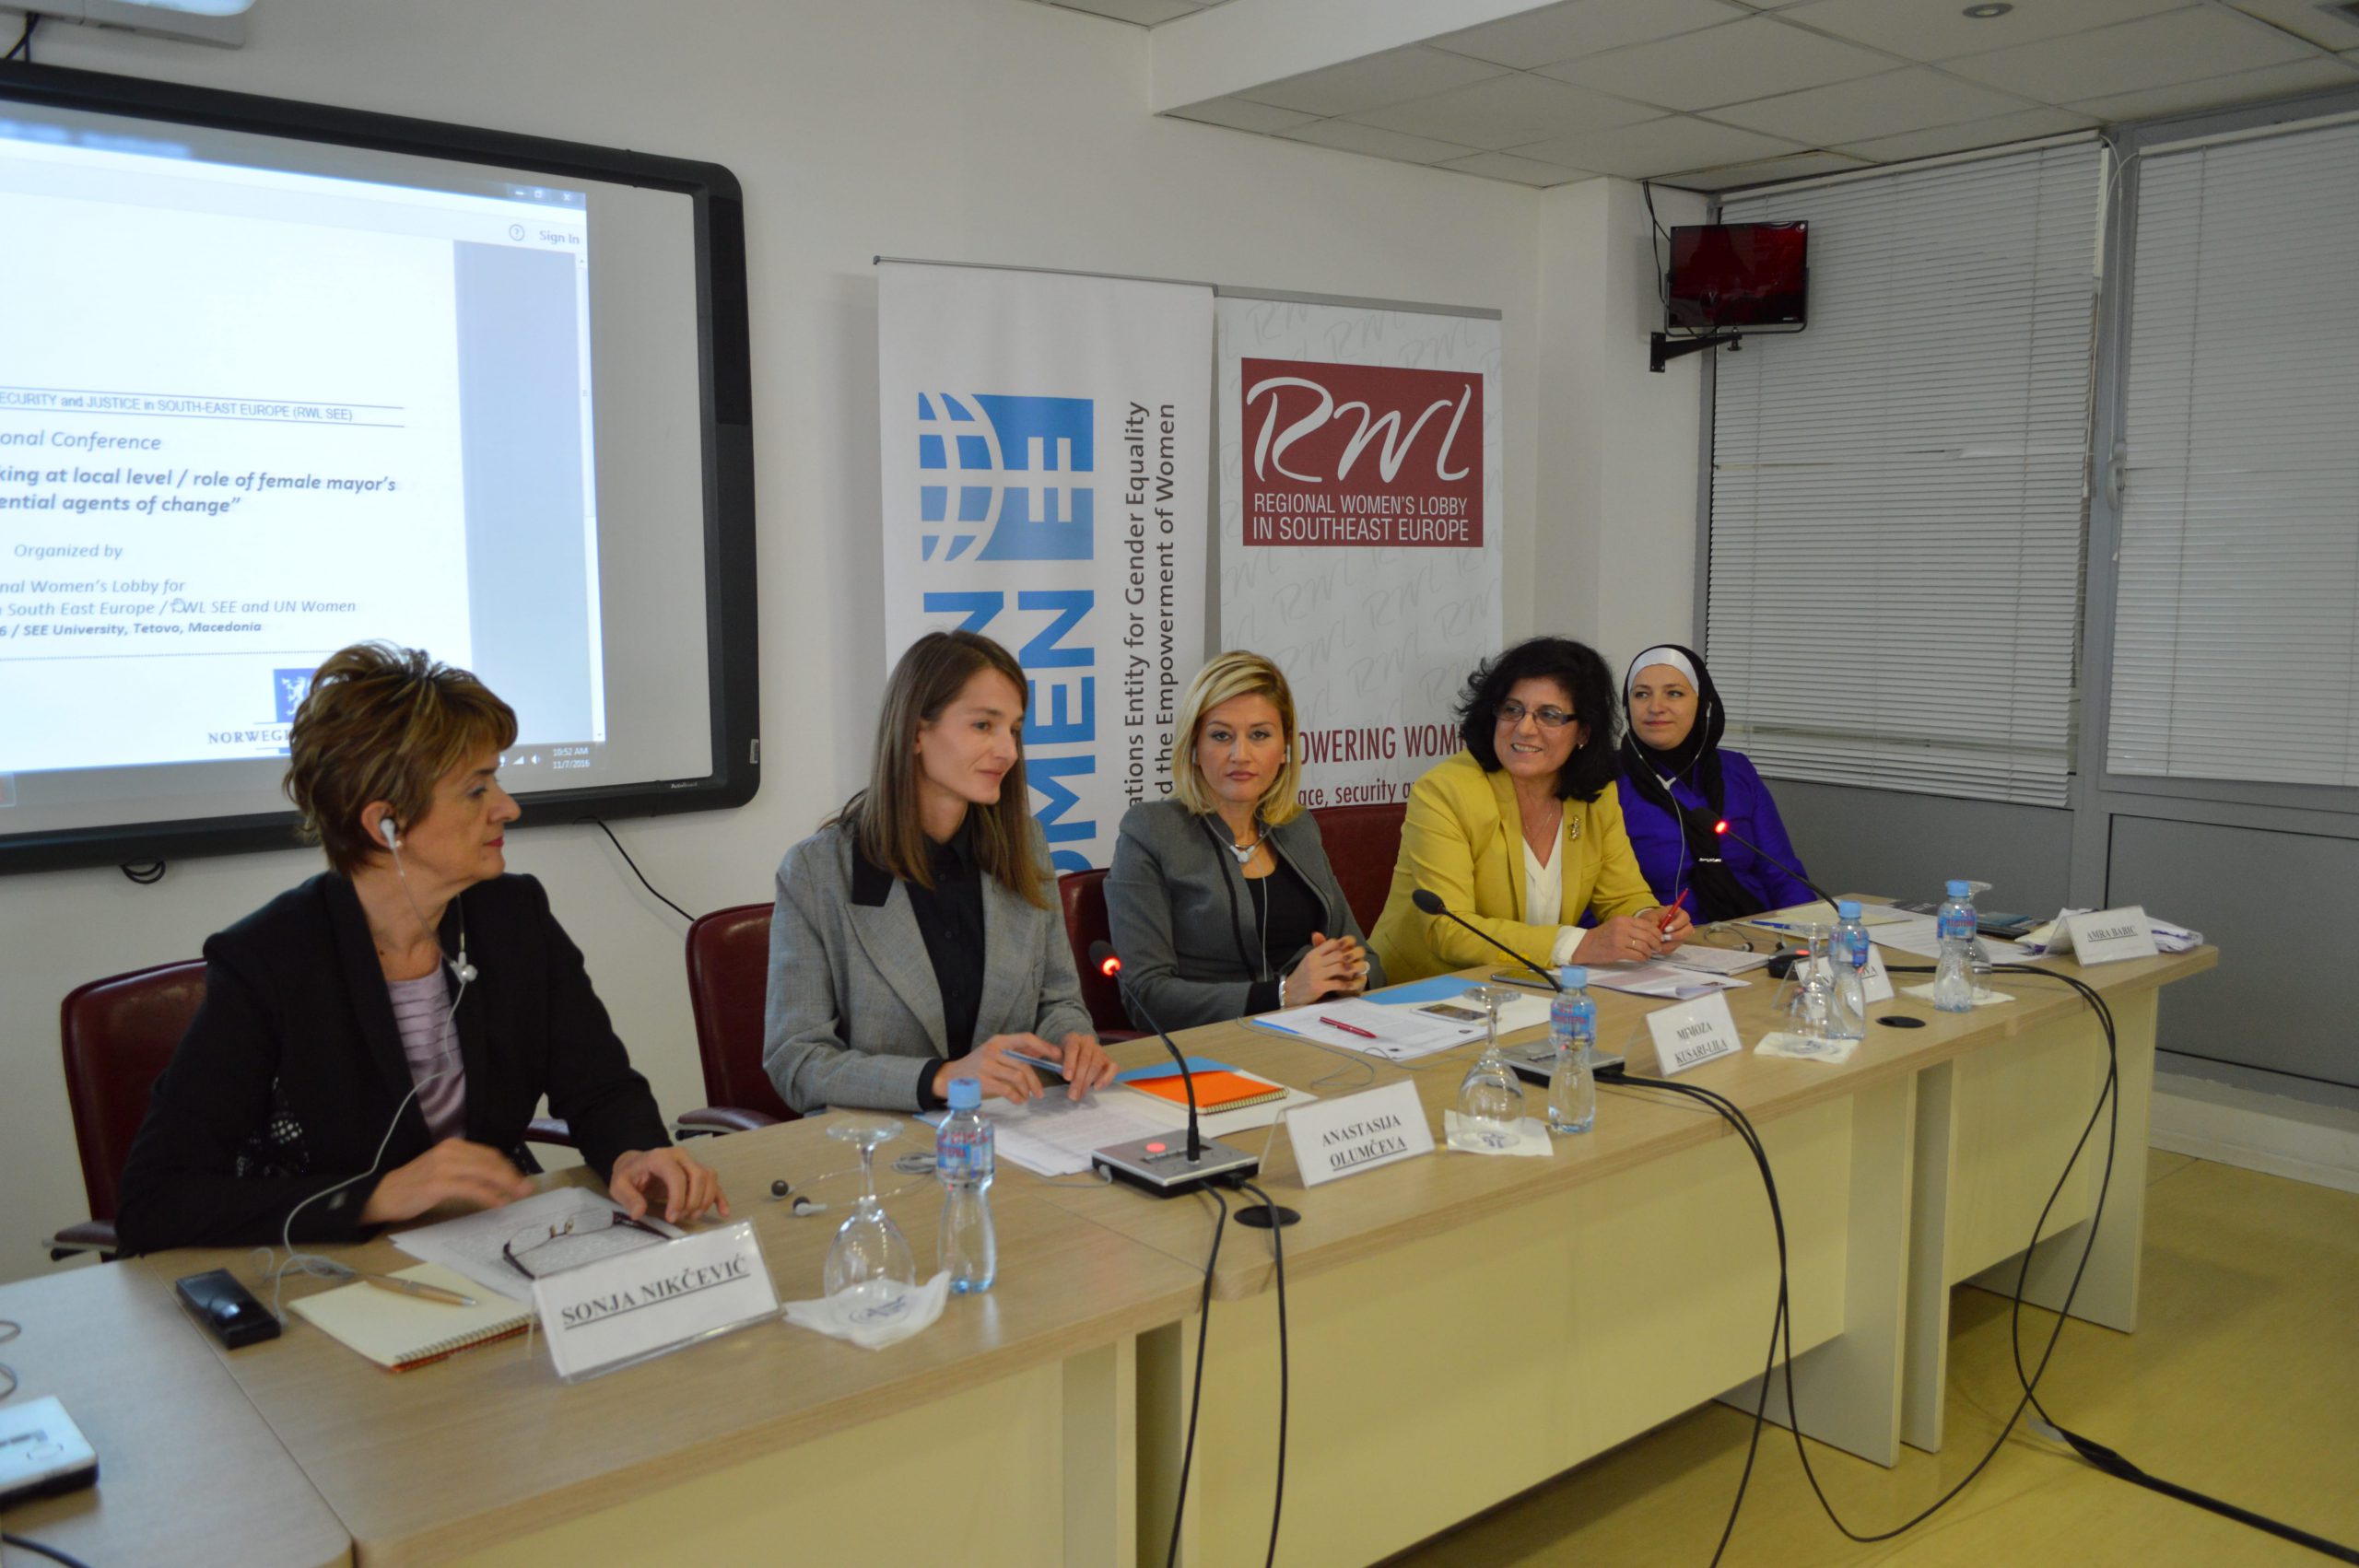 November 2016 – “WOMEN IN DECISION-MAKING AT LOCAL LEVEL ROLE OF WOMEN MAYORS AS POTENTIAL AGENTS OF CHANGE” – Tetovo Conference (4)